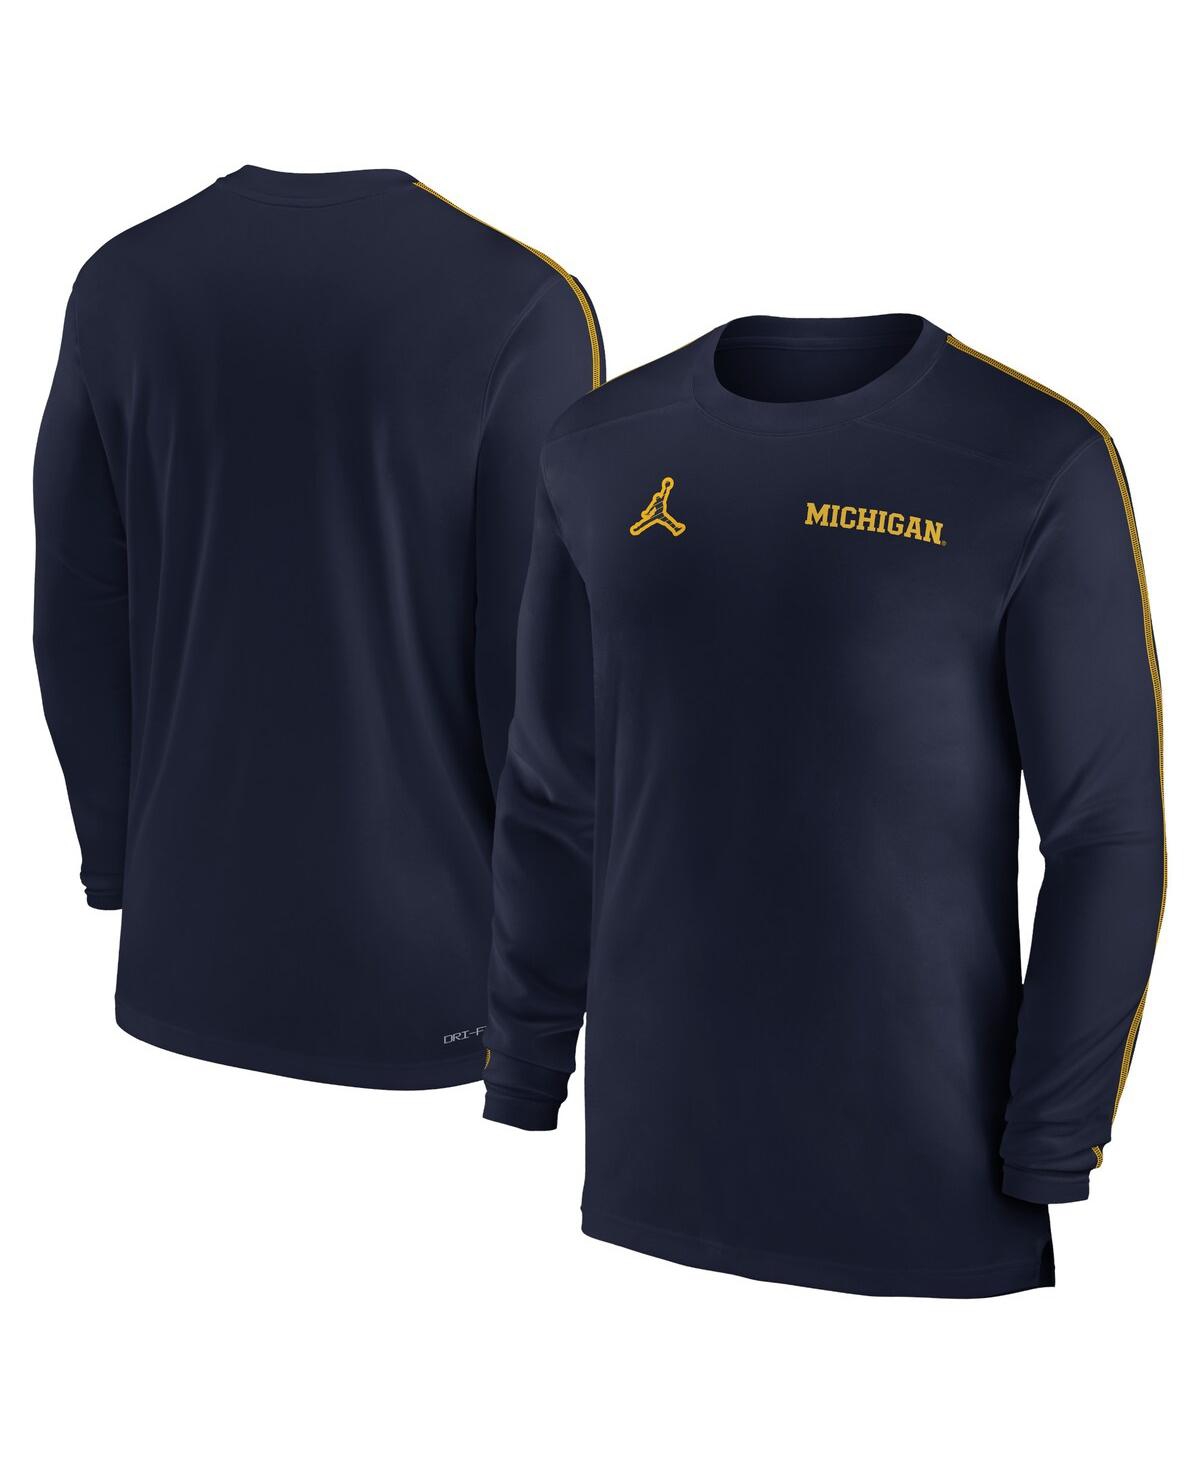 Men's Anthracite Michigan Wolverines 2024 Sideline Coach Performance Top - Navy, Maize